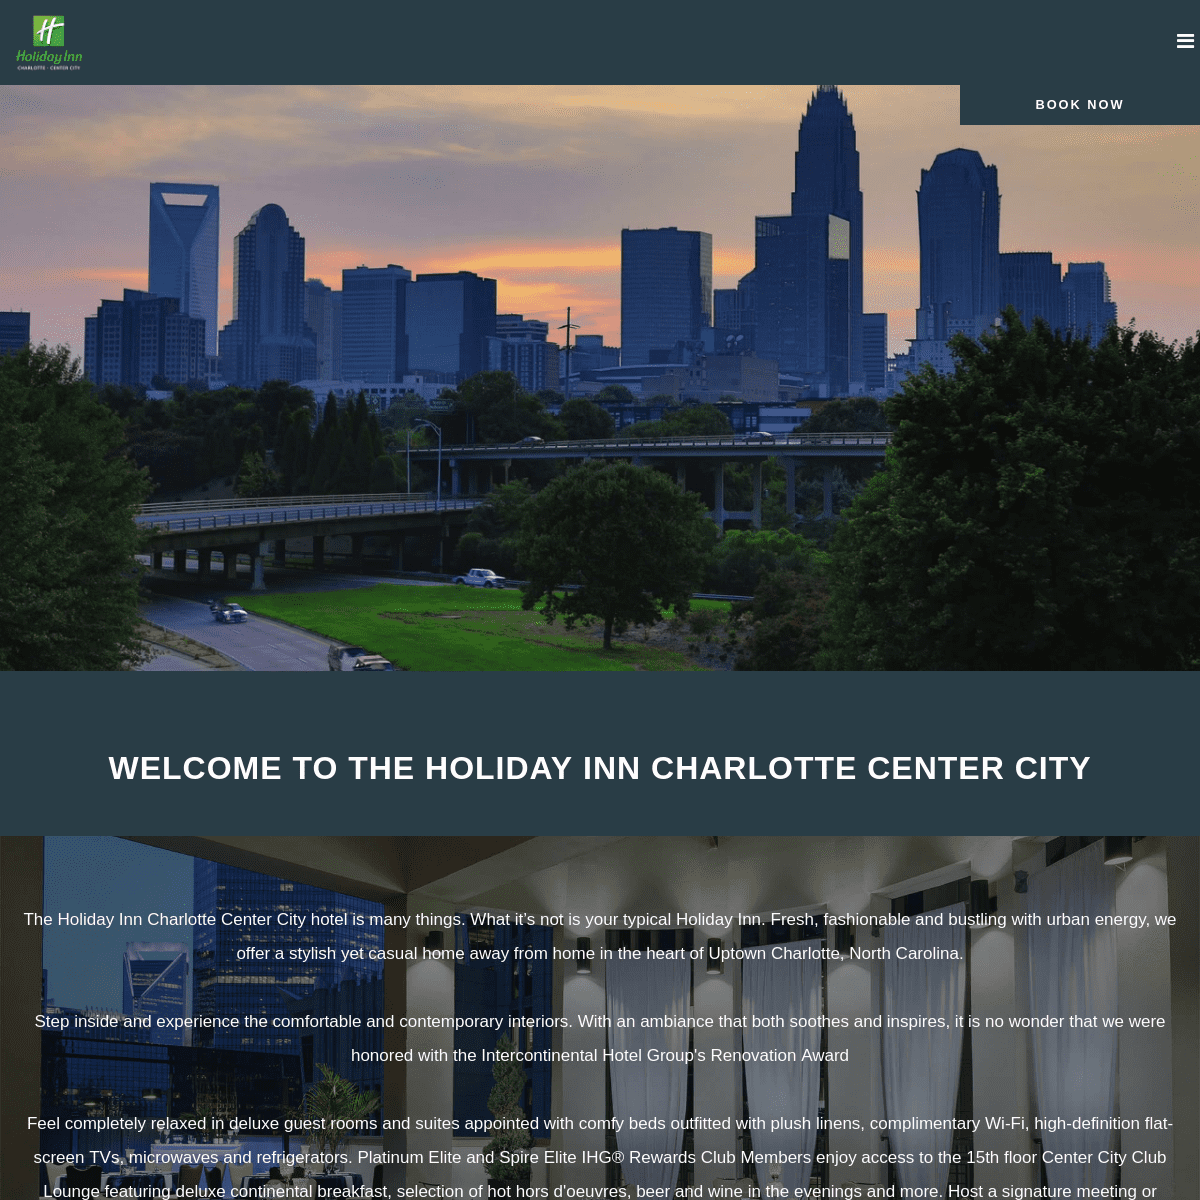 Holiday Inn Center City - Hotels in Downtown Charlotte, NC